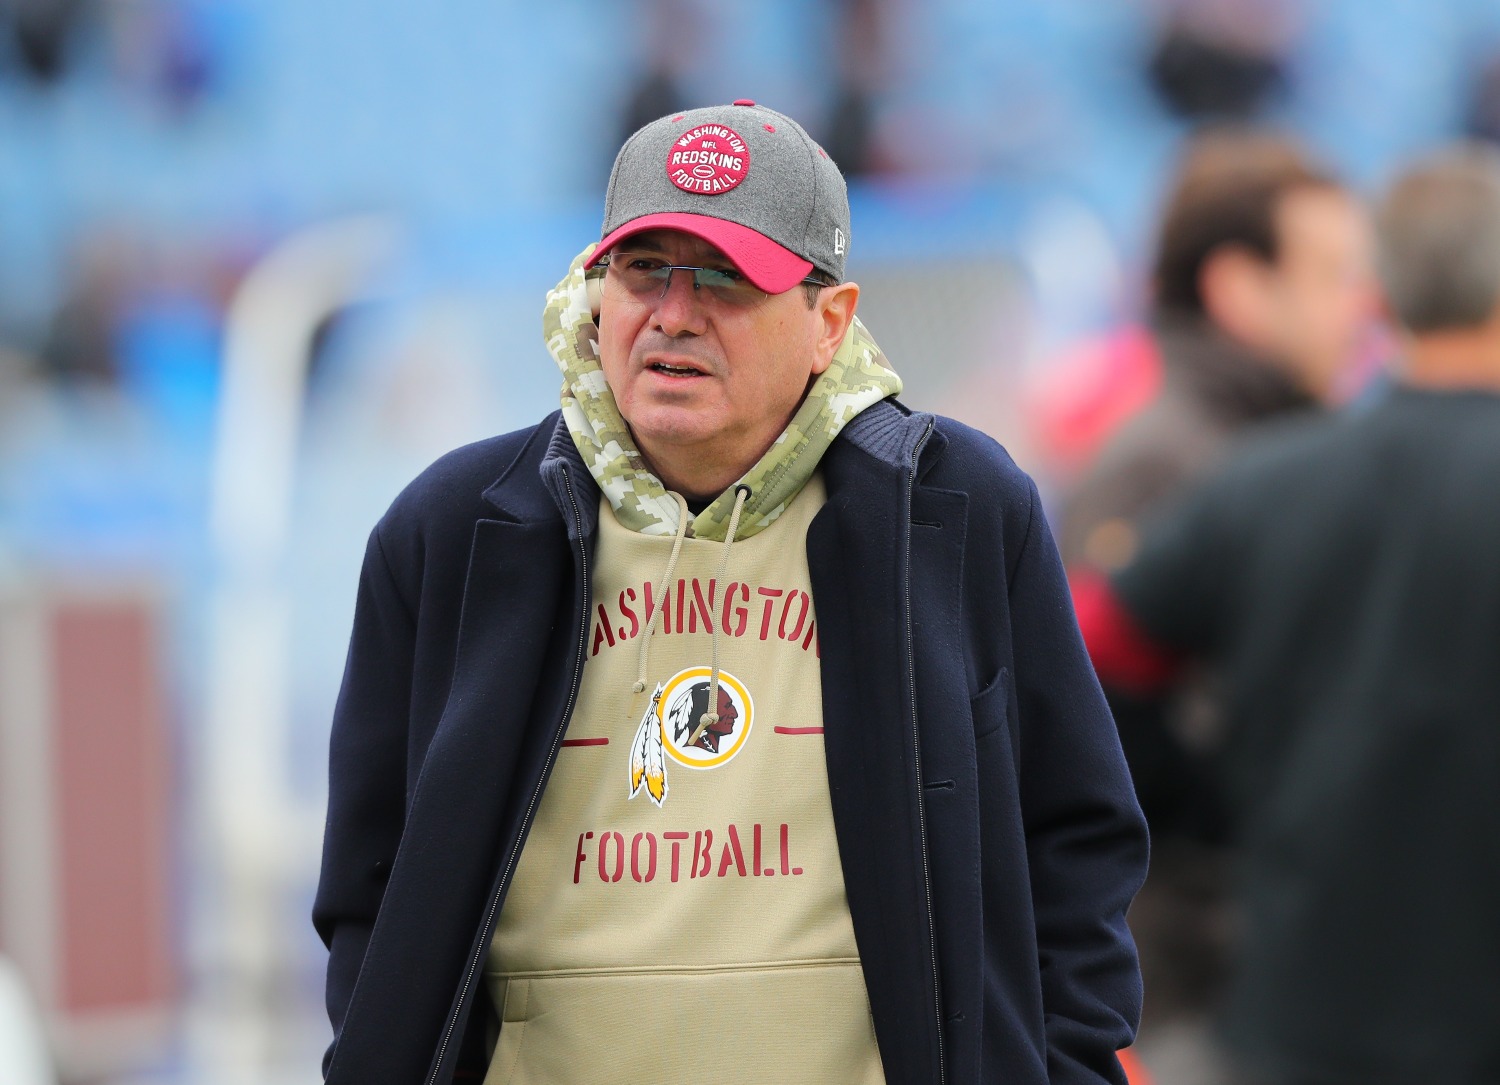 The Washington Redskins may never rebrand as the Washington Redtails thanks to a pending trademark application.